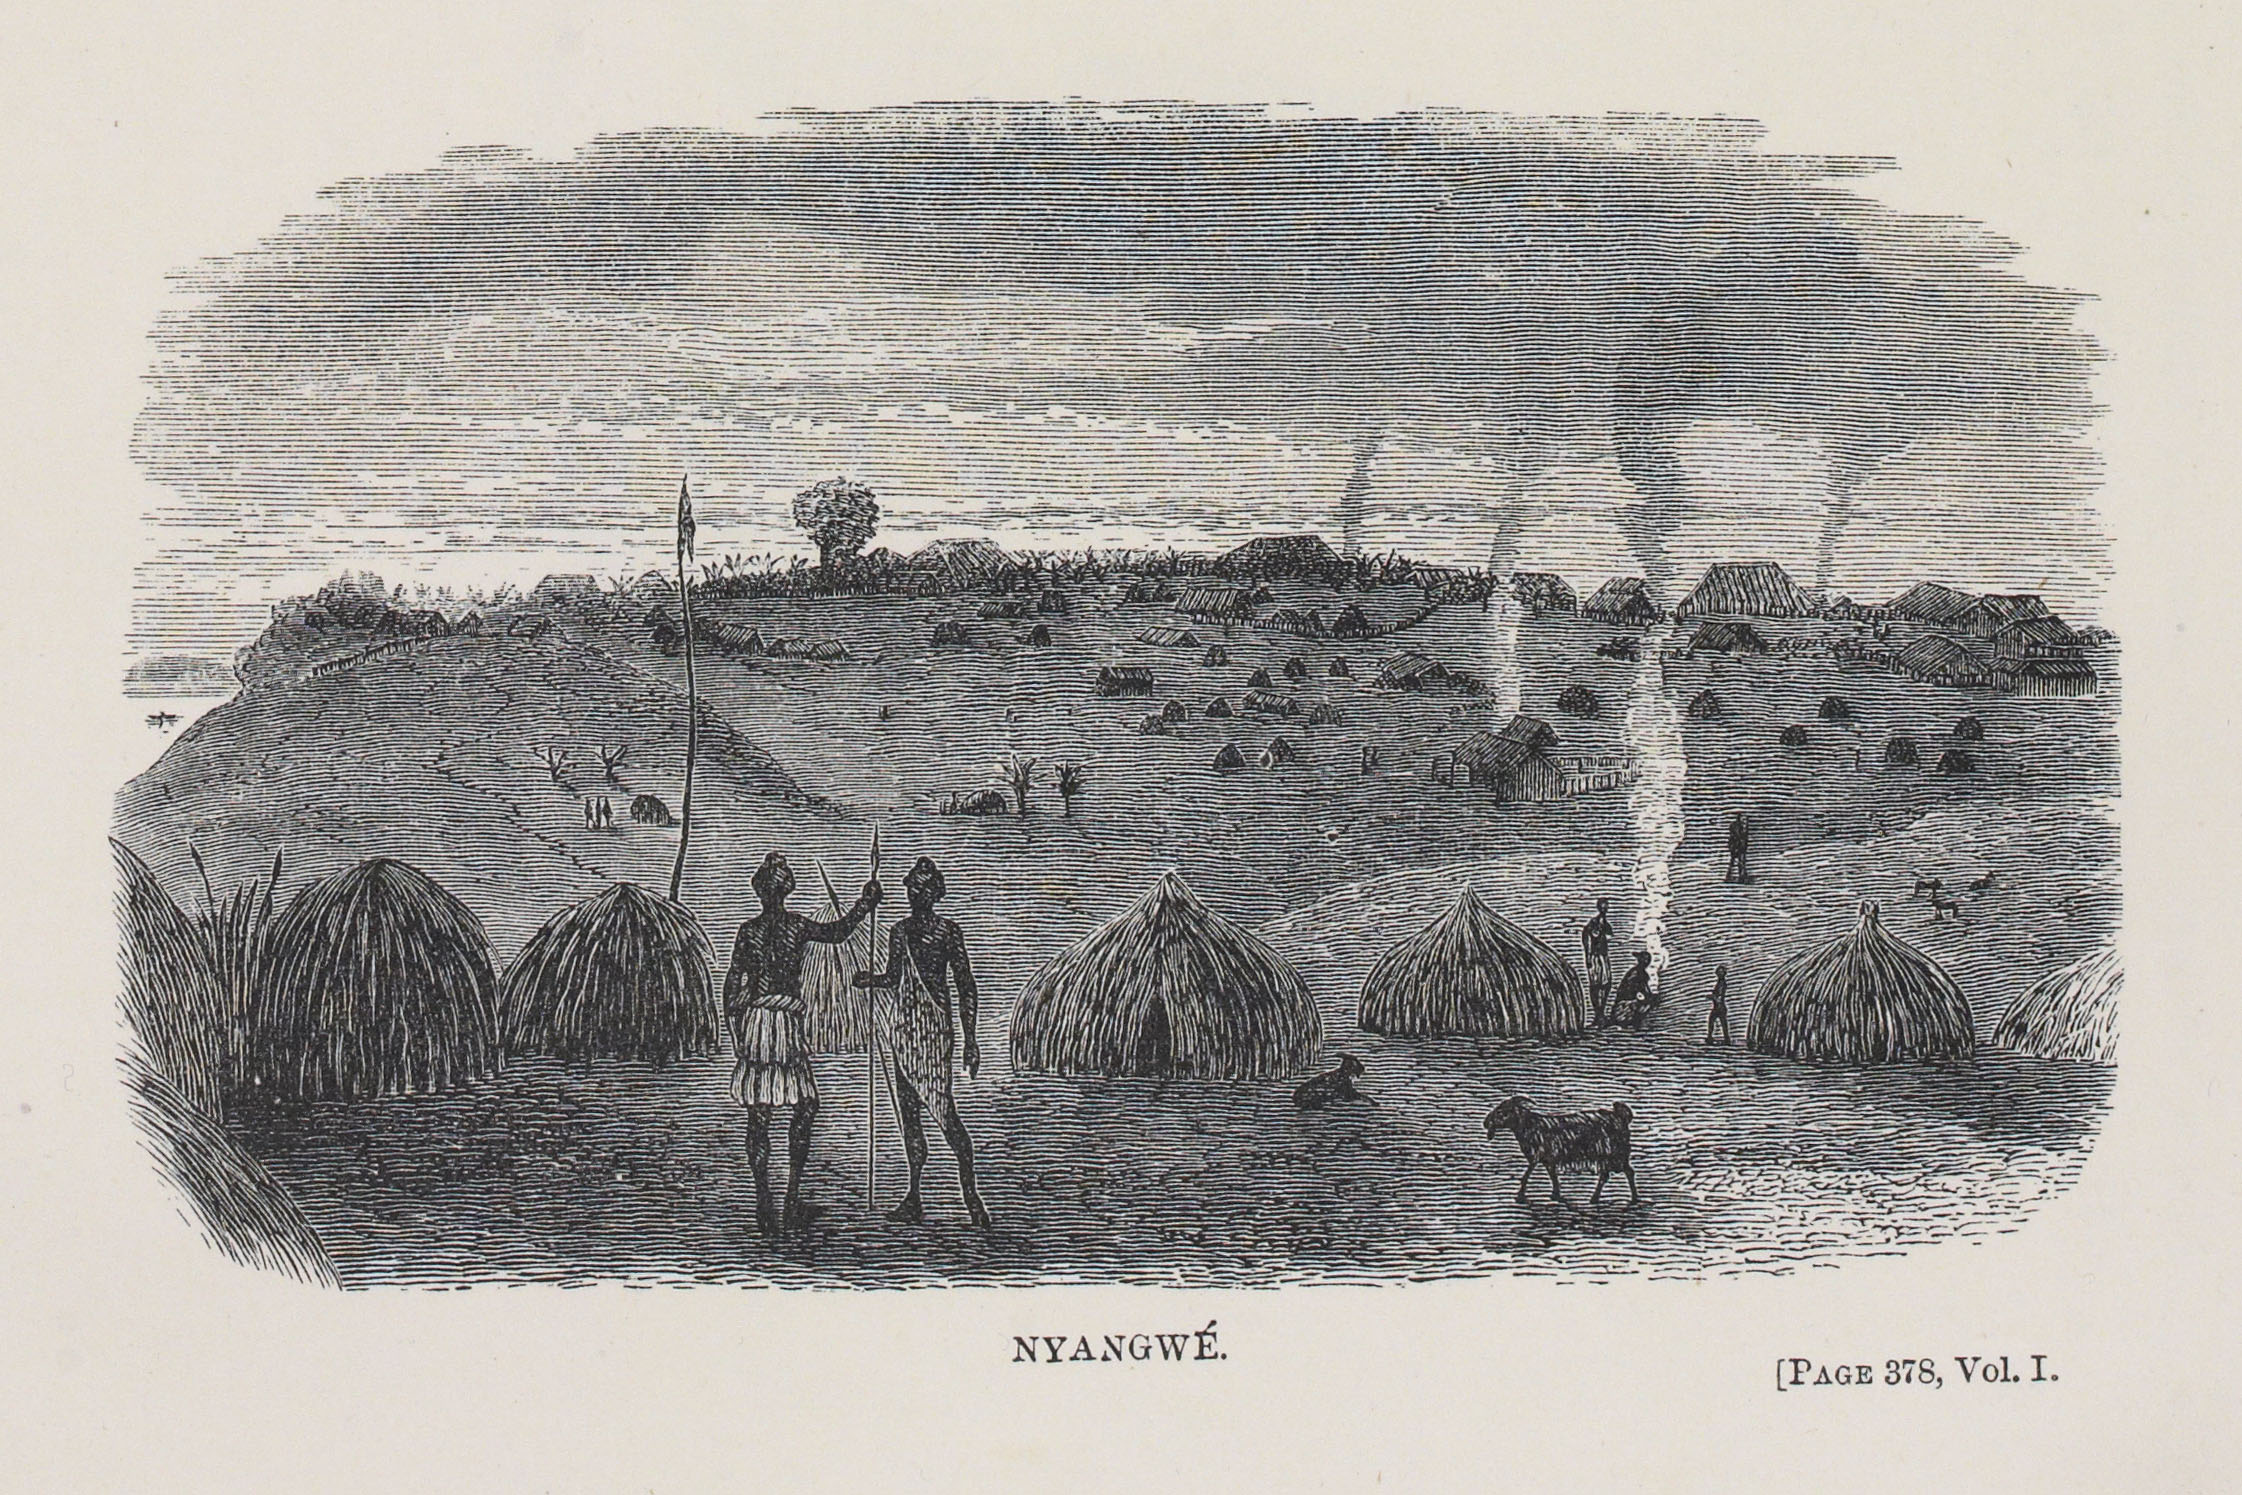 Nyangwe. Illustration from Cameron's Across Africa (1877a,1:opposite 378). Copyright National Library of Scotland. Creative Commons Share-alike 2.5 UK: Scotland (https://creativecommons.org/licenses/by-nc-sa/2.5/scotland/).